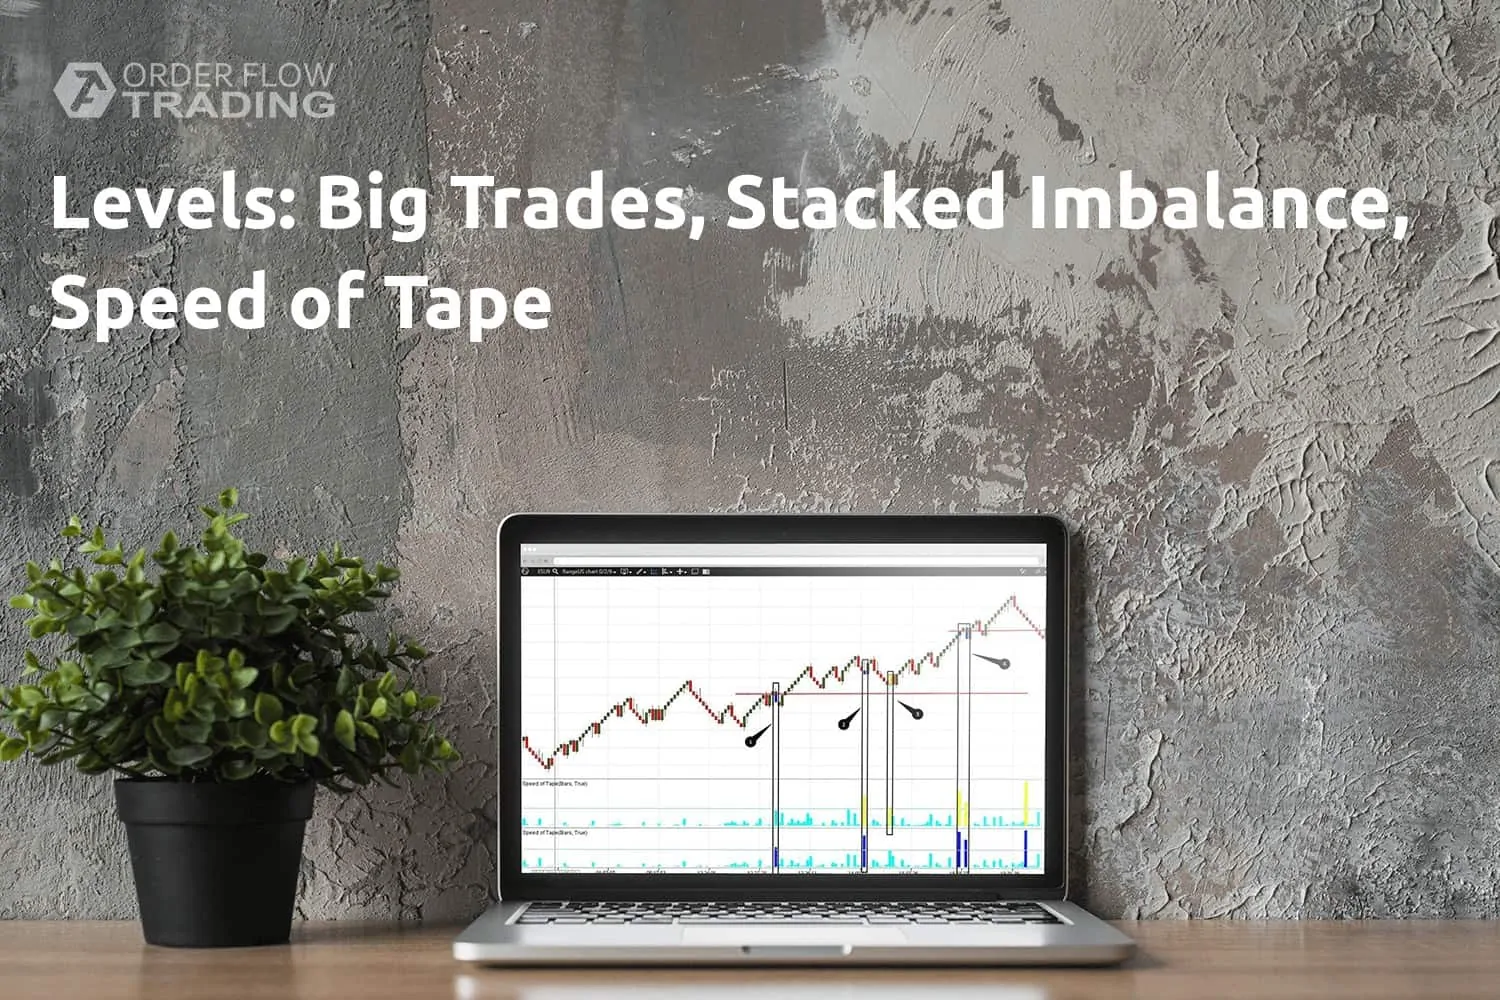 Trading by levels with the Big Trades, Stacked Imbalance and Speed of Tape indicators